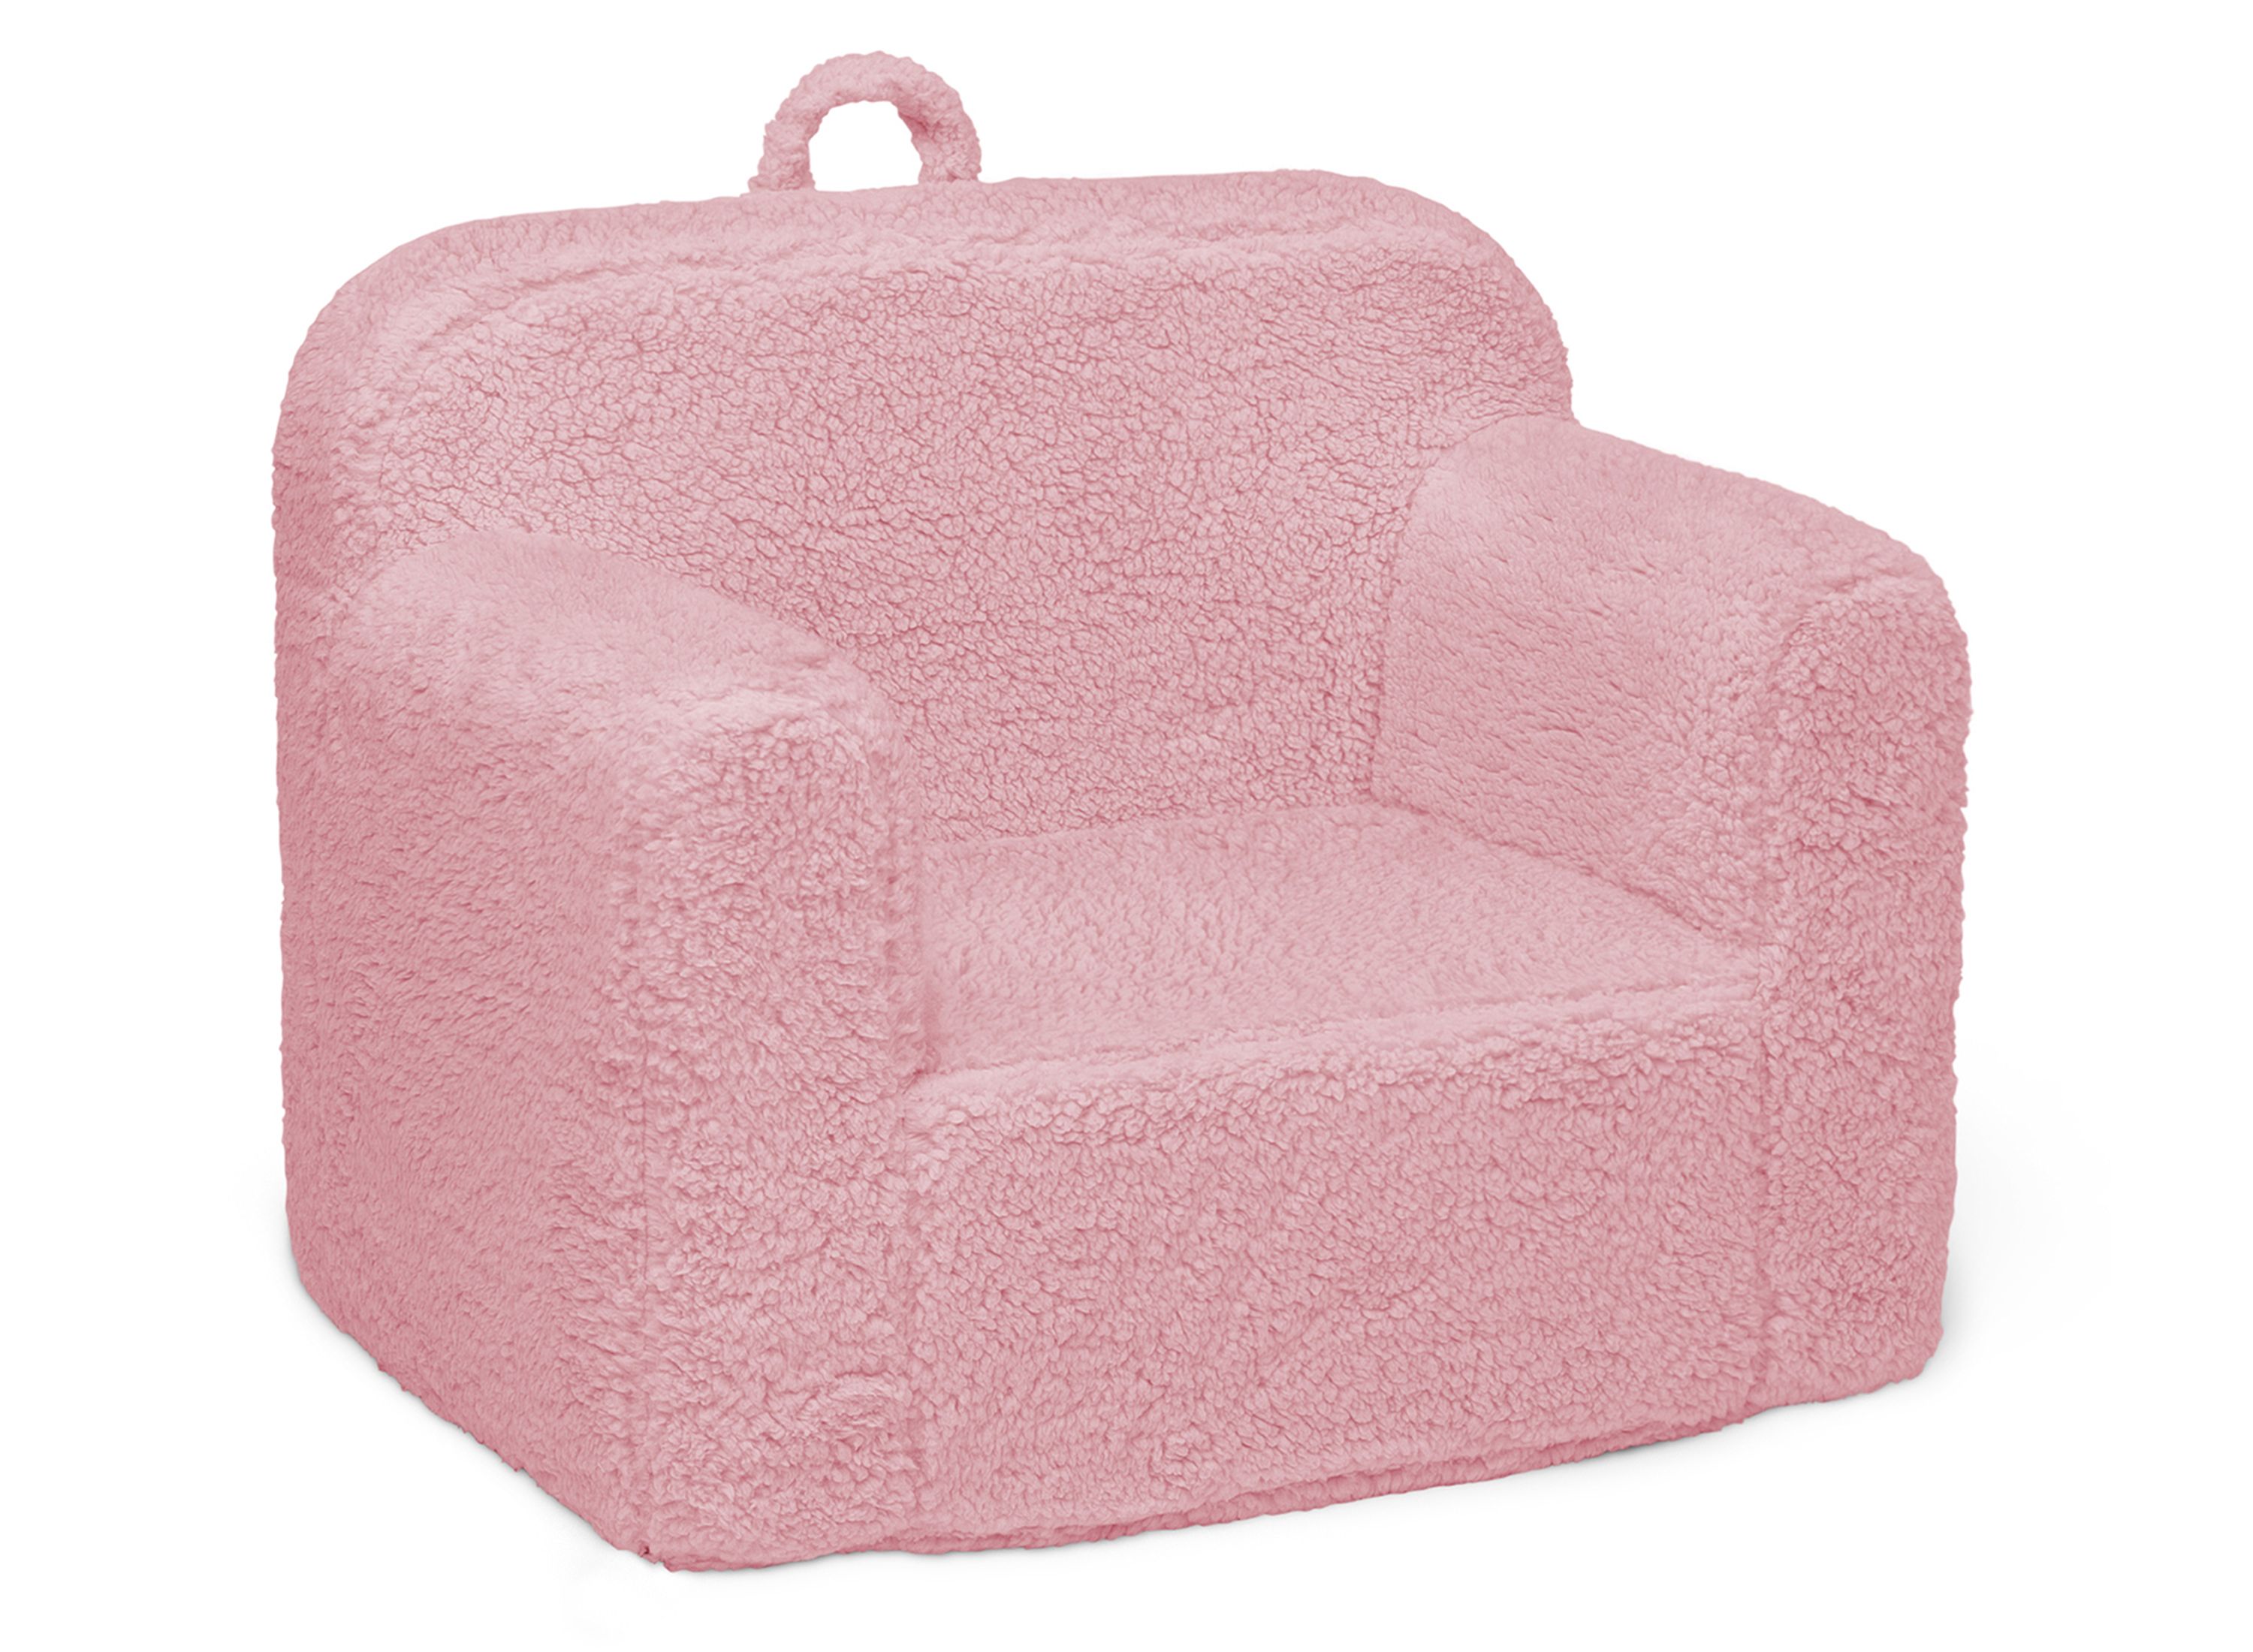 Cozee Sherpa Kids Chair by Delta Children | Raymour & Flanigan ...